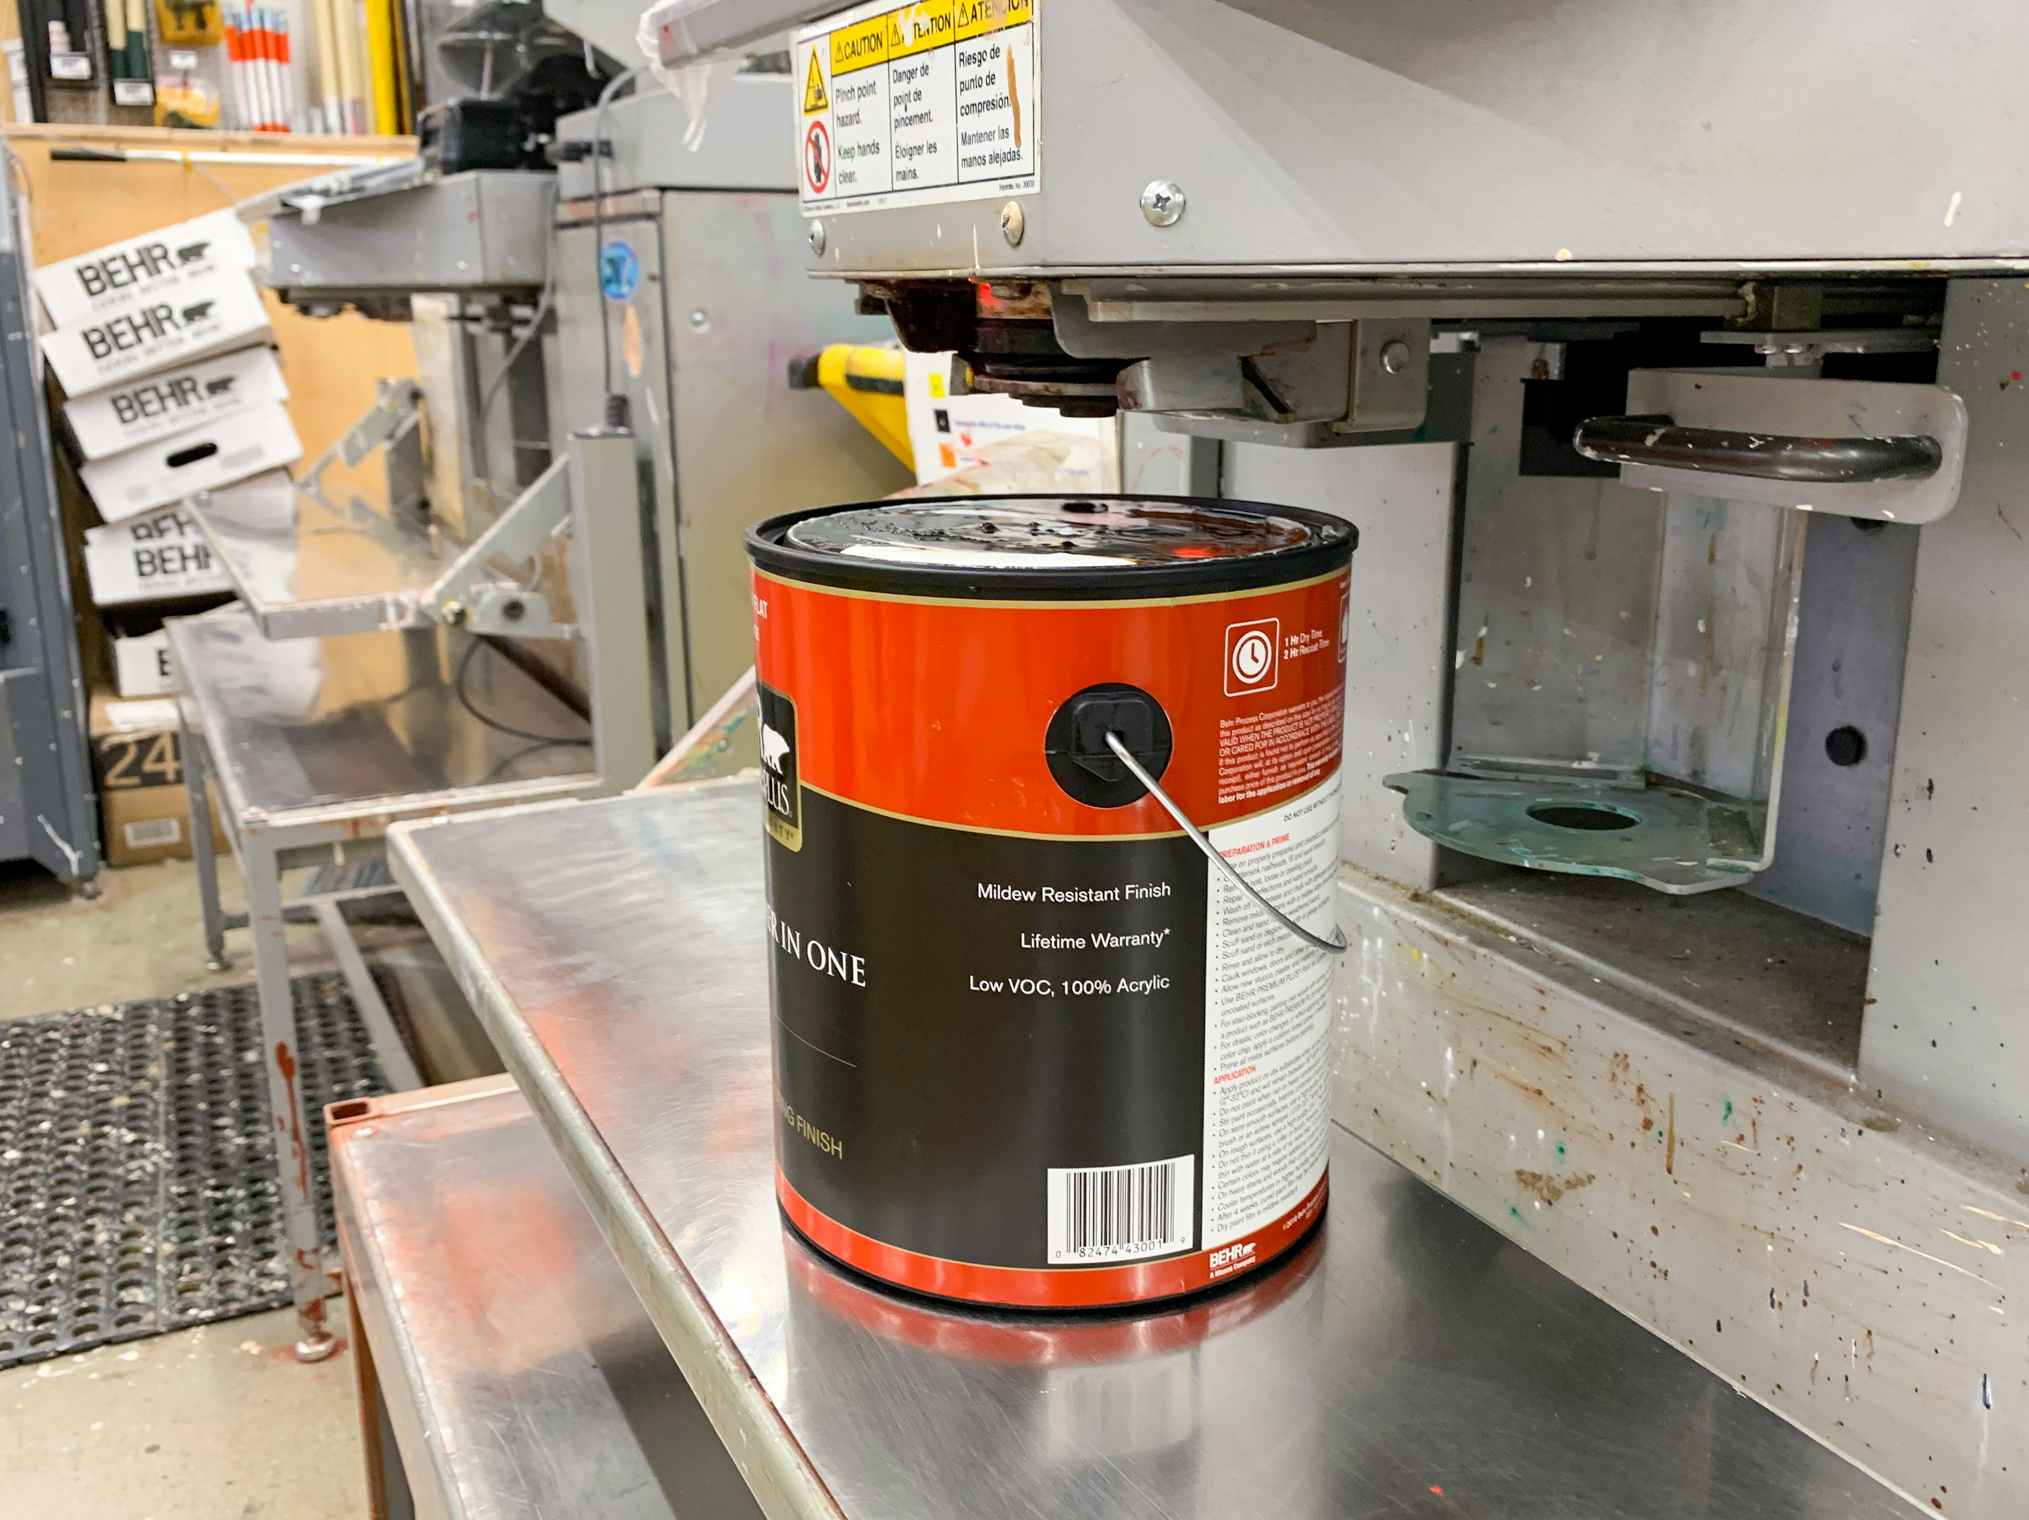 An open can of paint sitting below the machine used for tinting paint at Home Depot